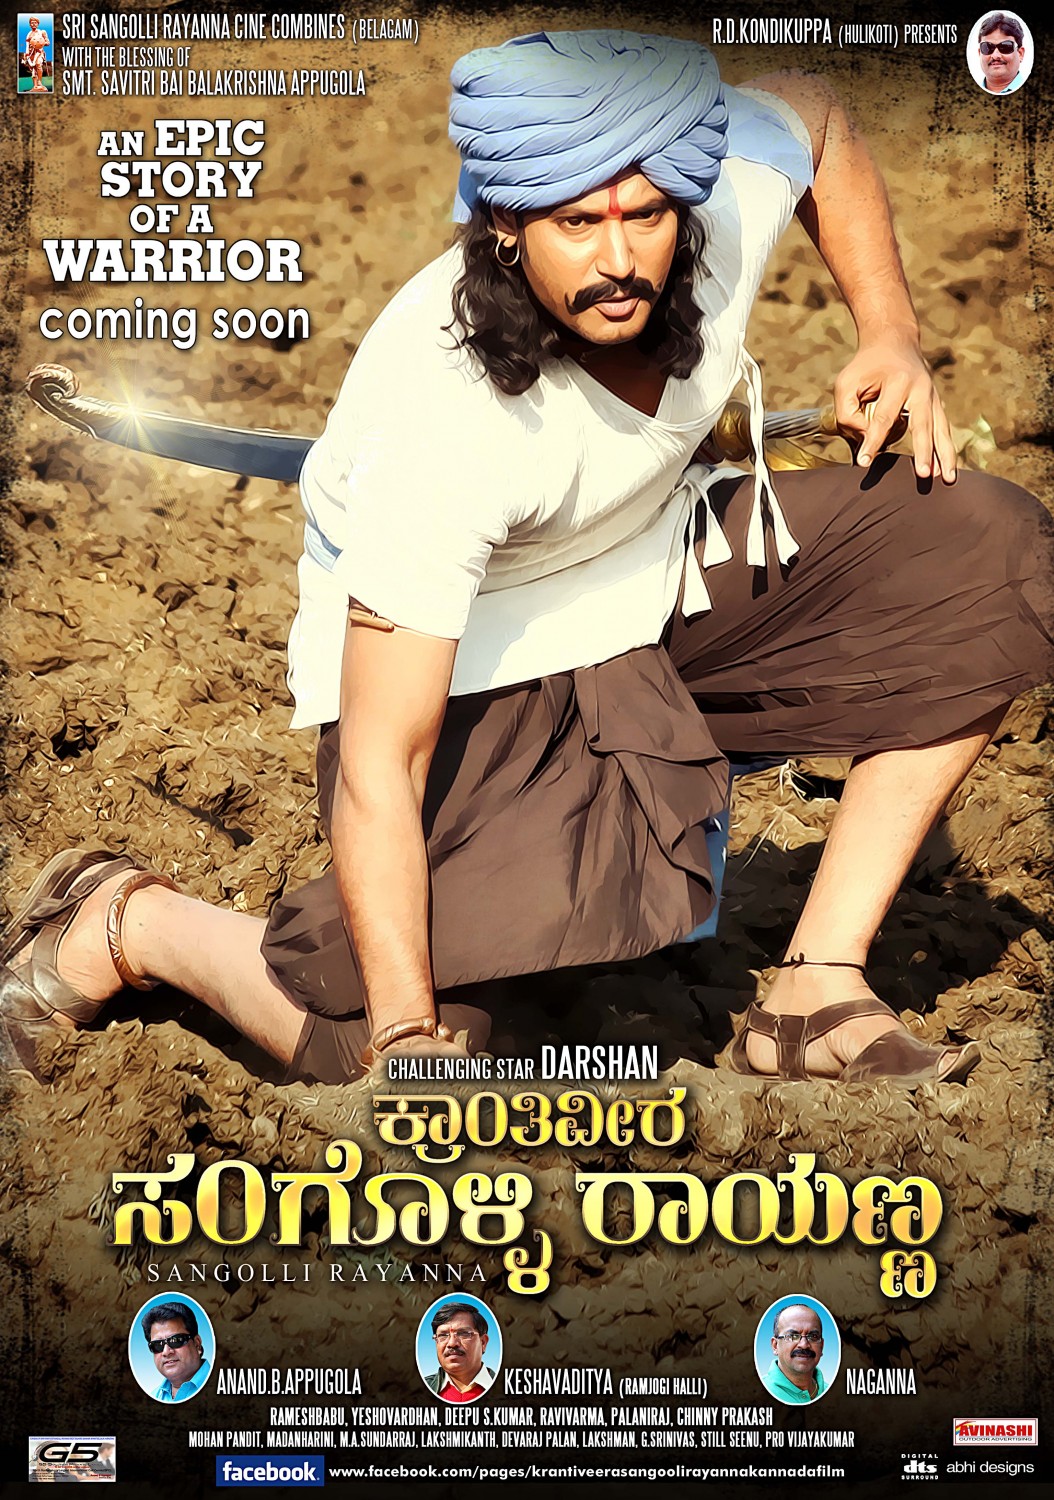 Extra Large Movie Poster Image for Sangolli Rayanna (#27 of 79)